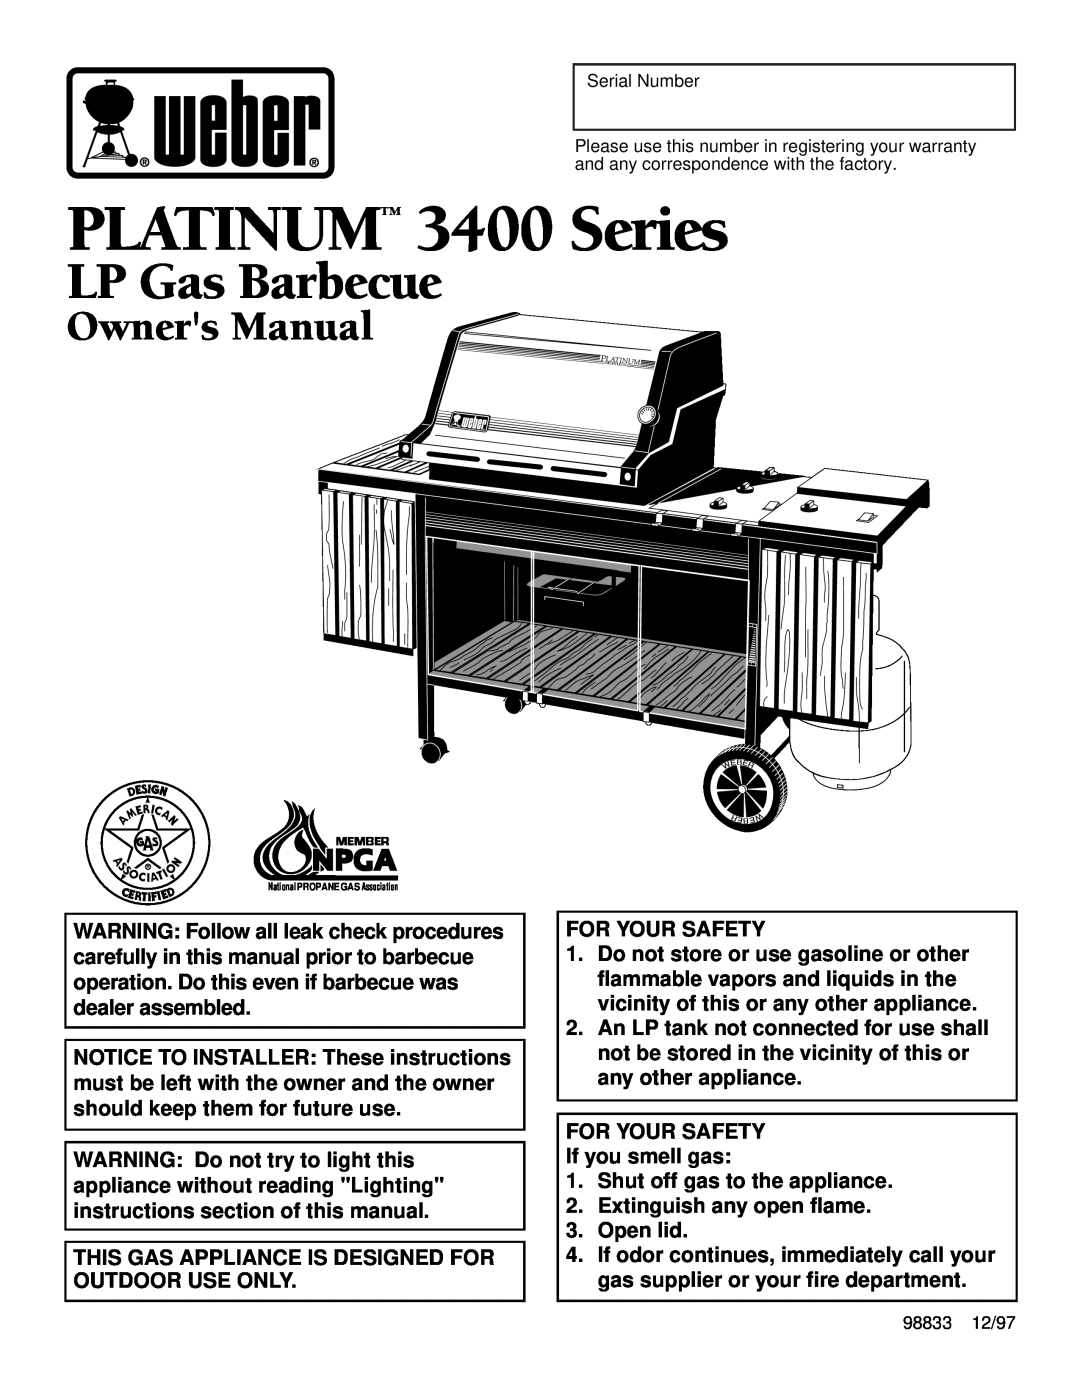 Weber owner manual LP Gas Barbecue, PLATINUM 3400 Series, For Your Safety, FOR YOUR SAFETY If you smell gas 